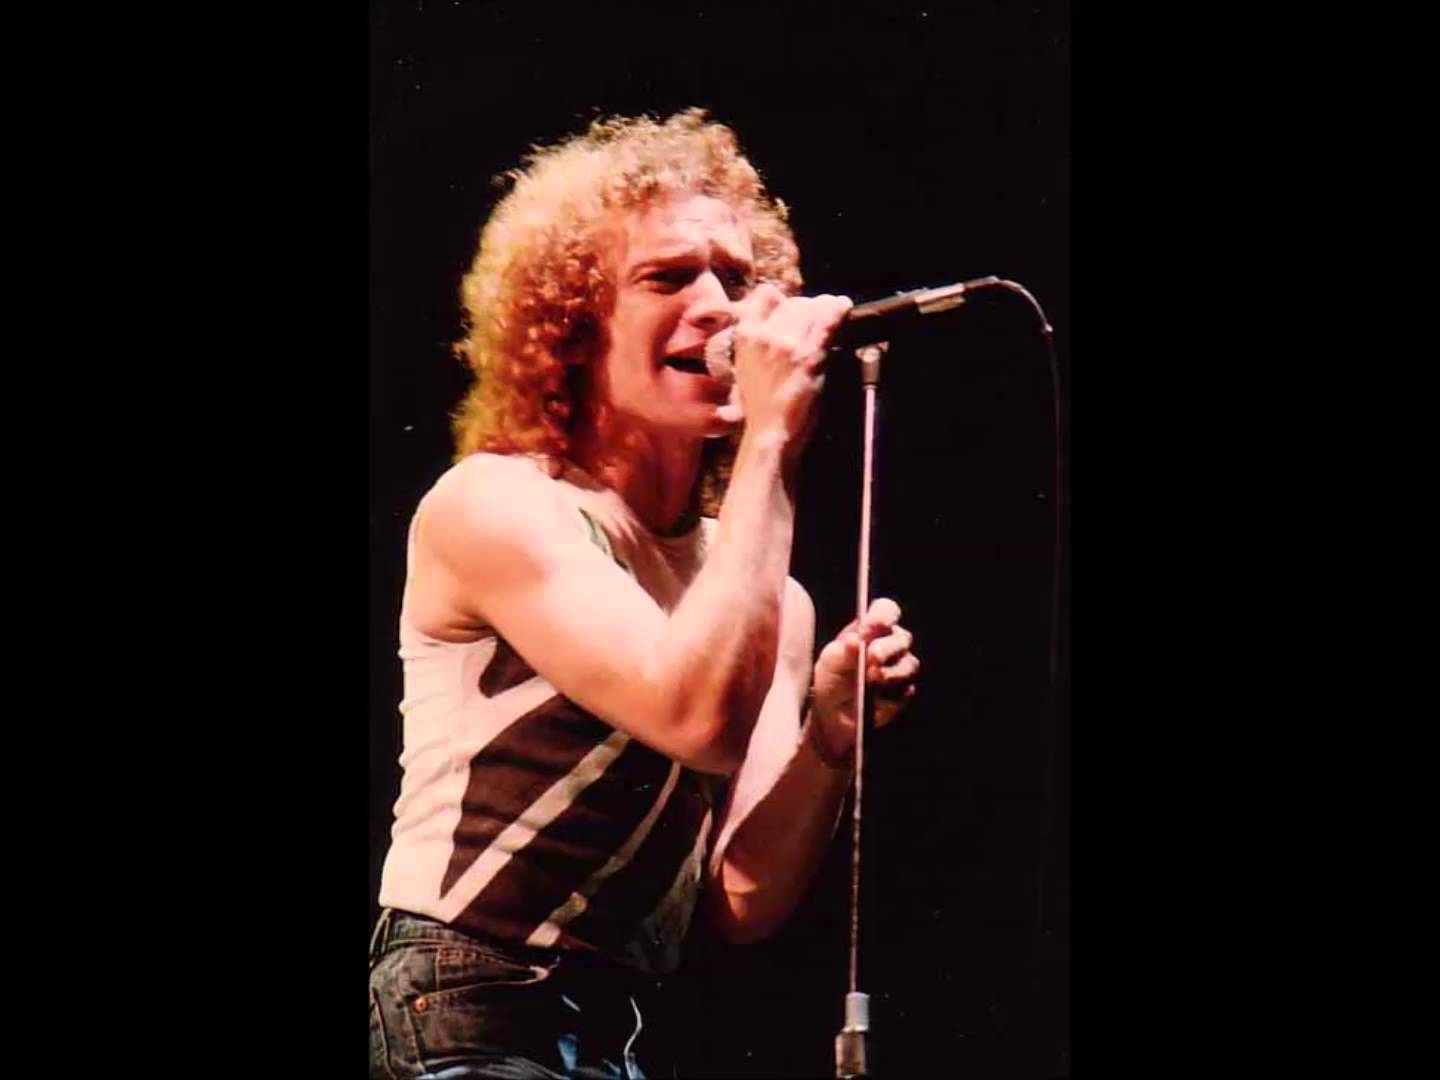 Happy 67th birthday to Lou Gramm, singer for Foreigner and solo artist